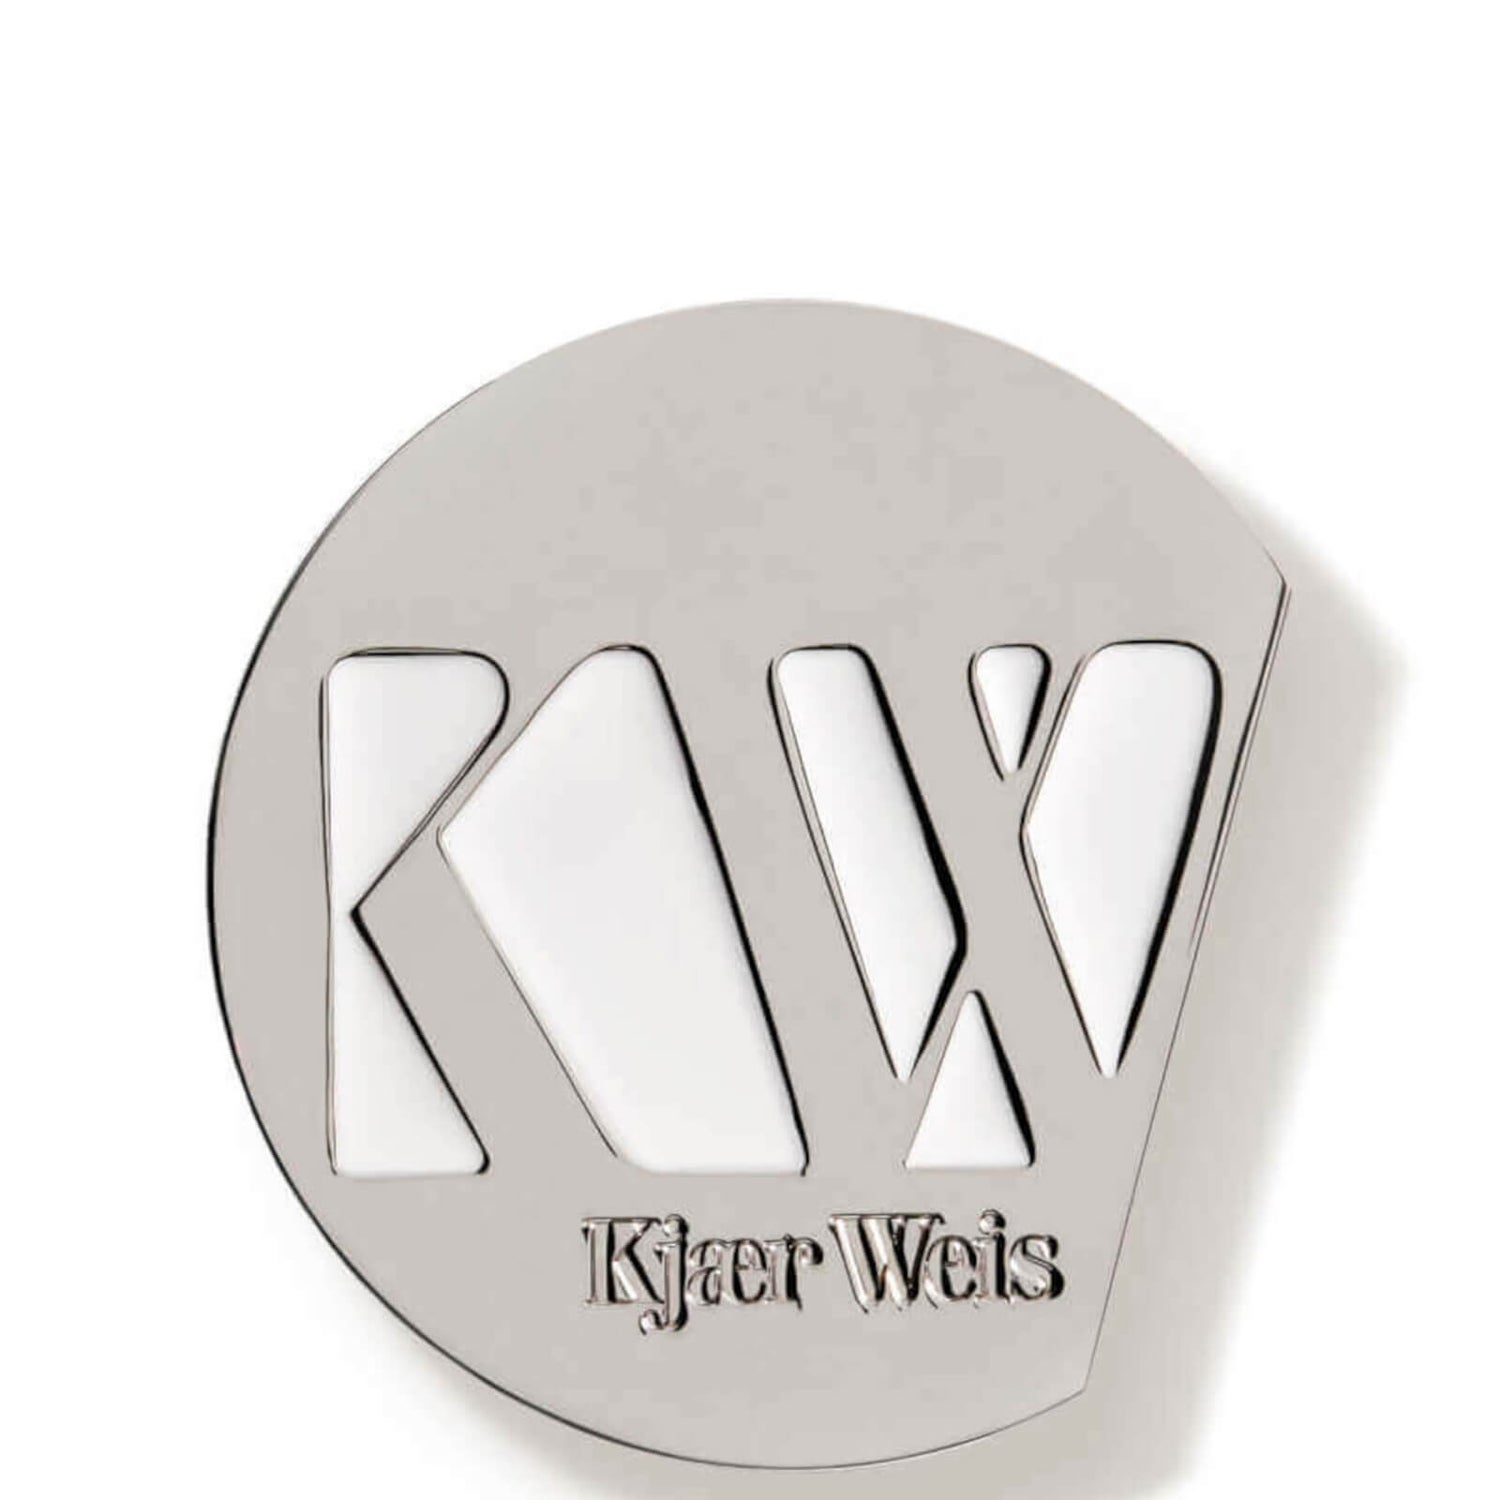 Kjaer Weis Iconic Edition Compact - Face Powder (1 piece)